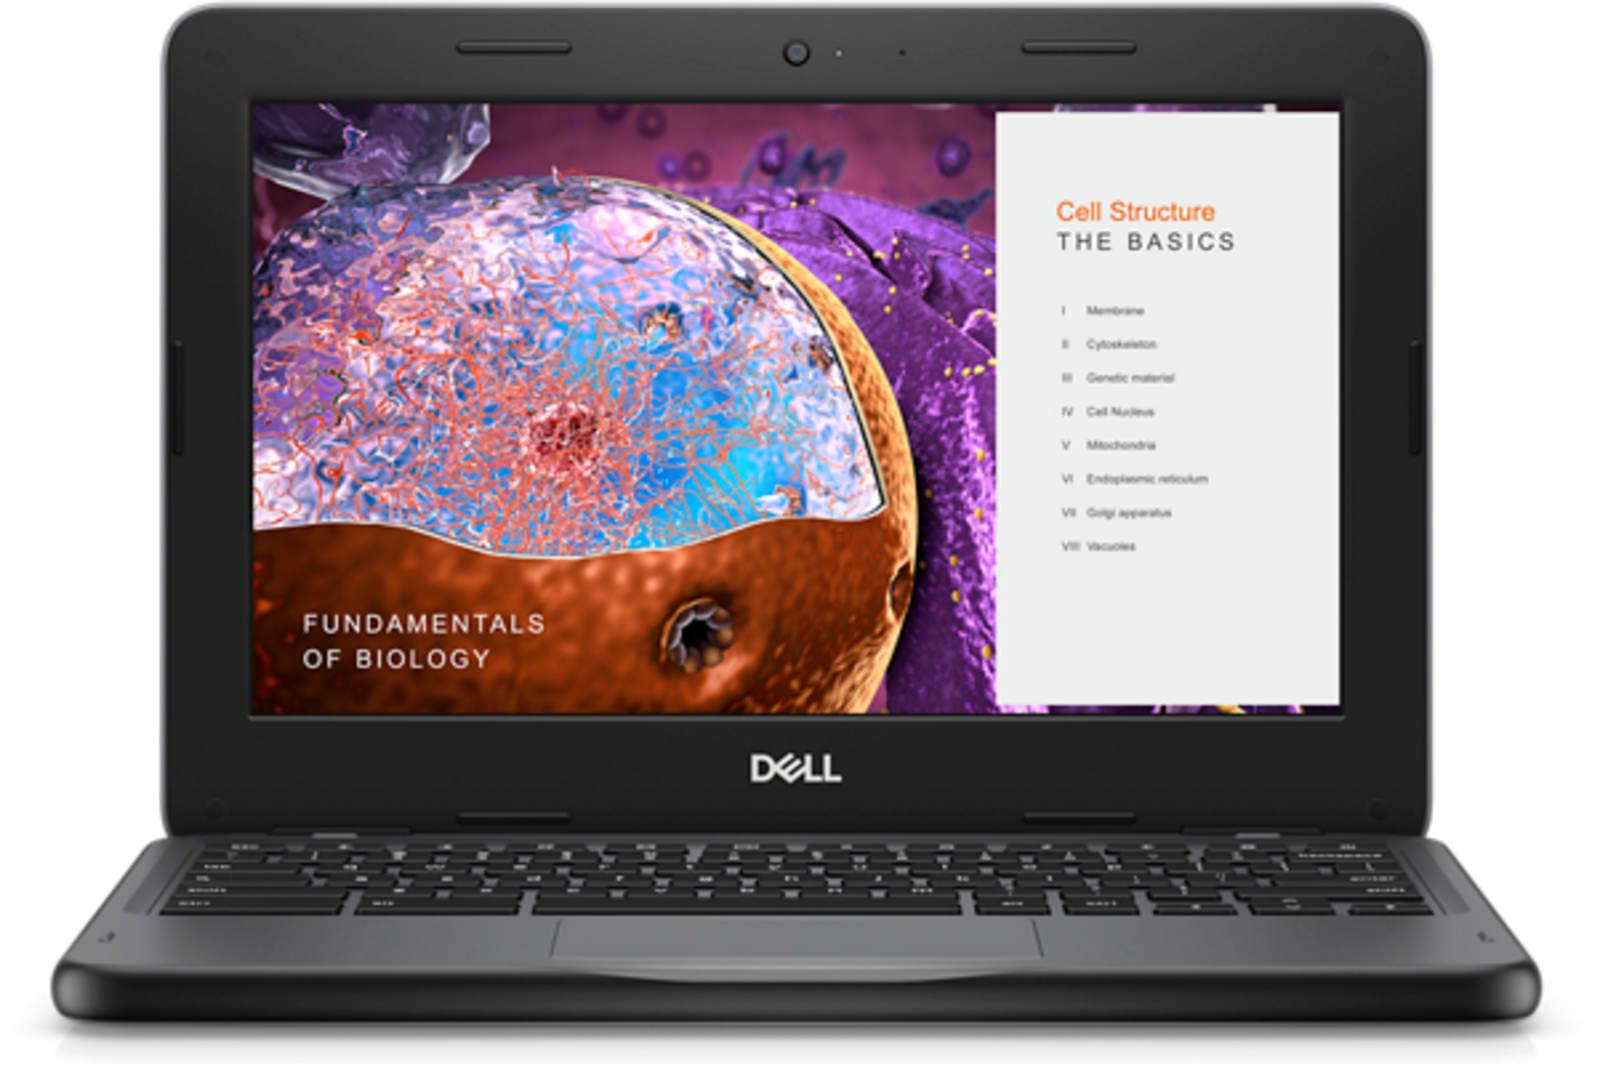 Dell Chromebook 11 3110 Laptop (2022) | 11" HD Touch | Core Celeron - 32GB SSD - 4GB RAM | 2 Cores Chrome OS (Renewed)